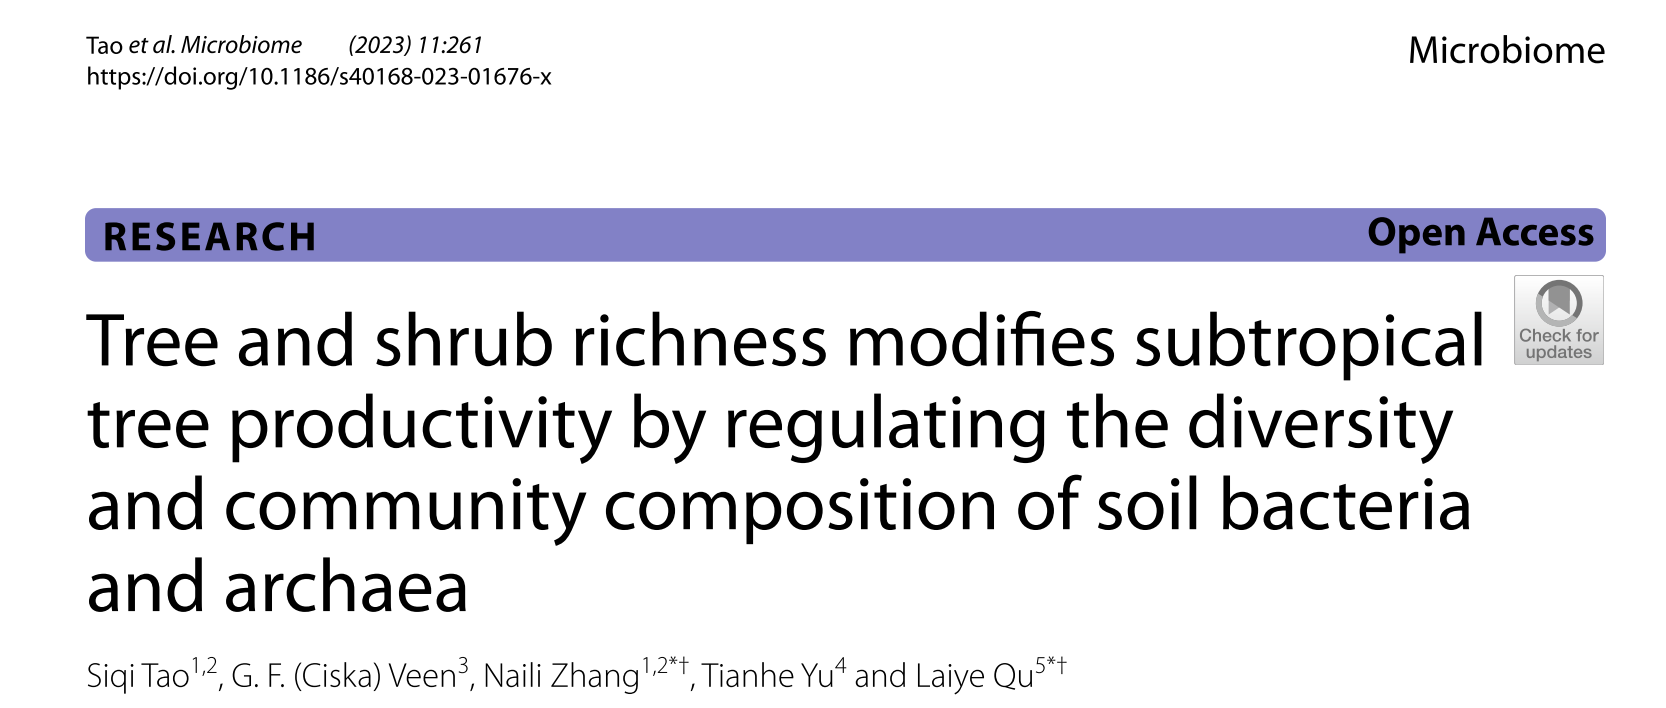 Tree and shrub richness modifies subtropical tree productivity by regulating the diversity and community composition of soil bacteria and archaea